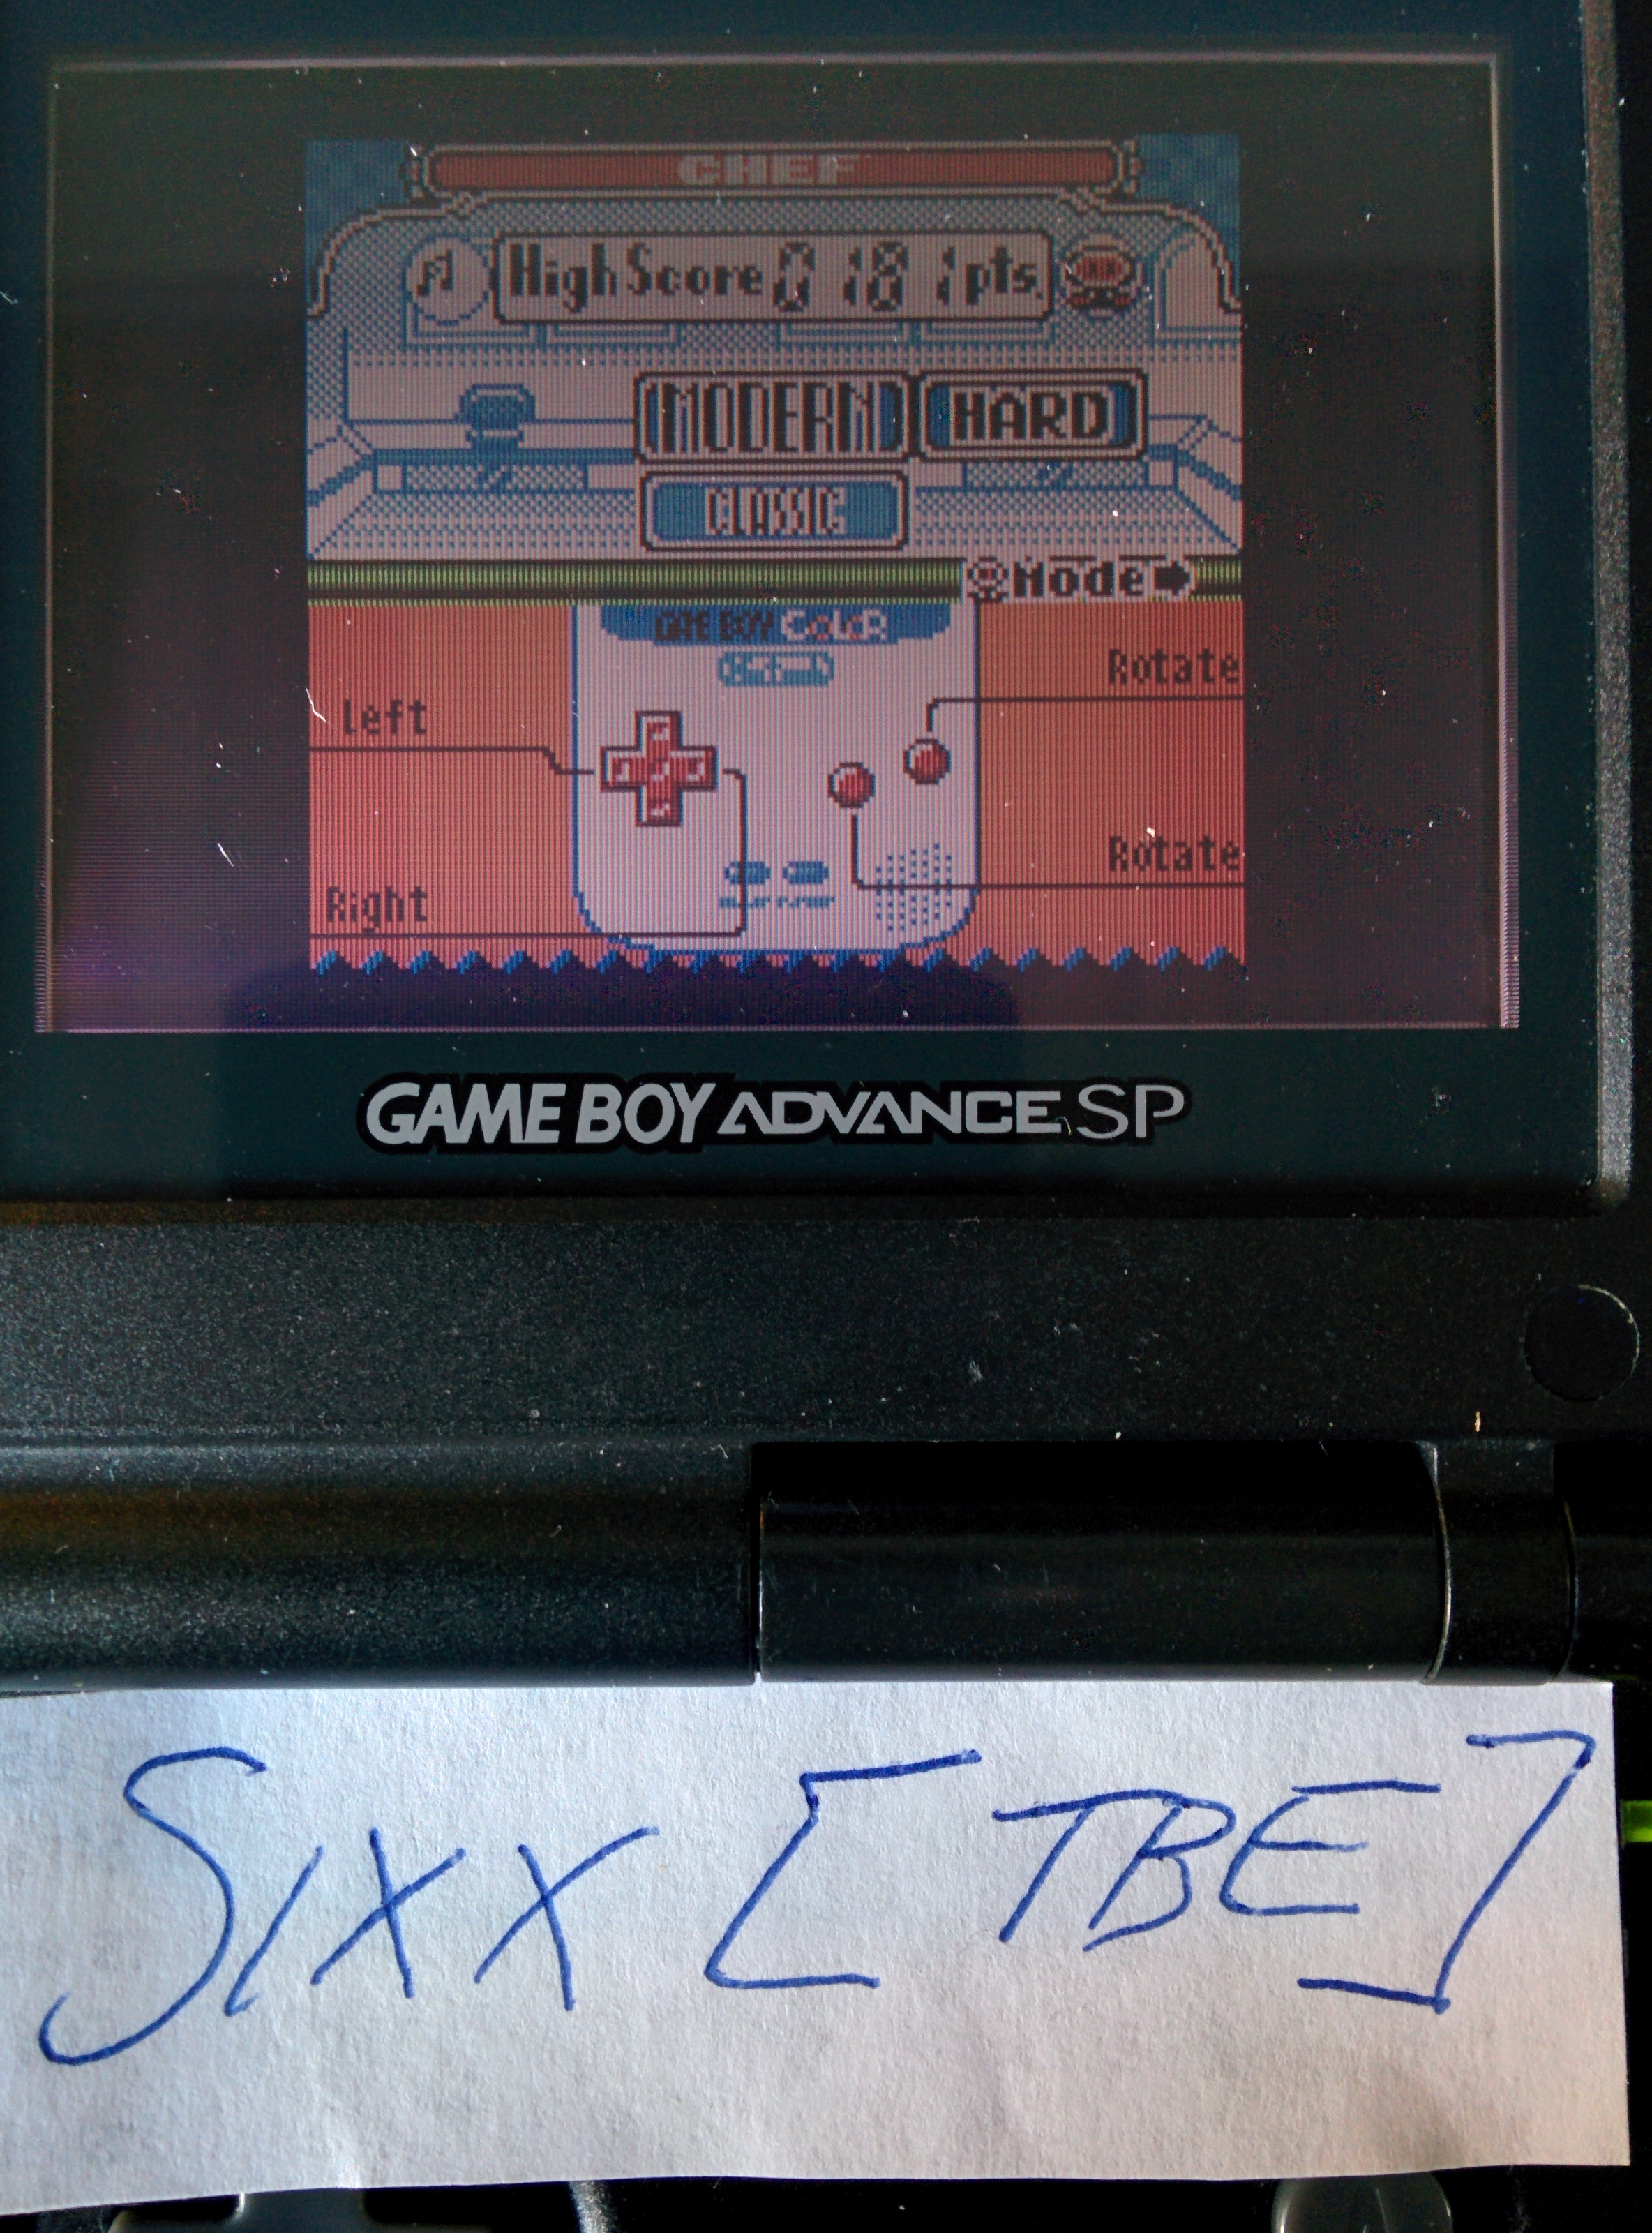 Sixx: Game & Watch Gallery 2: Chef: Modern: Hard (Game Boy Color) 181 points on 2014-08-25 02:24:36